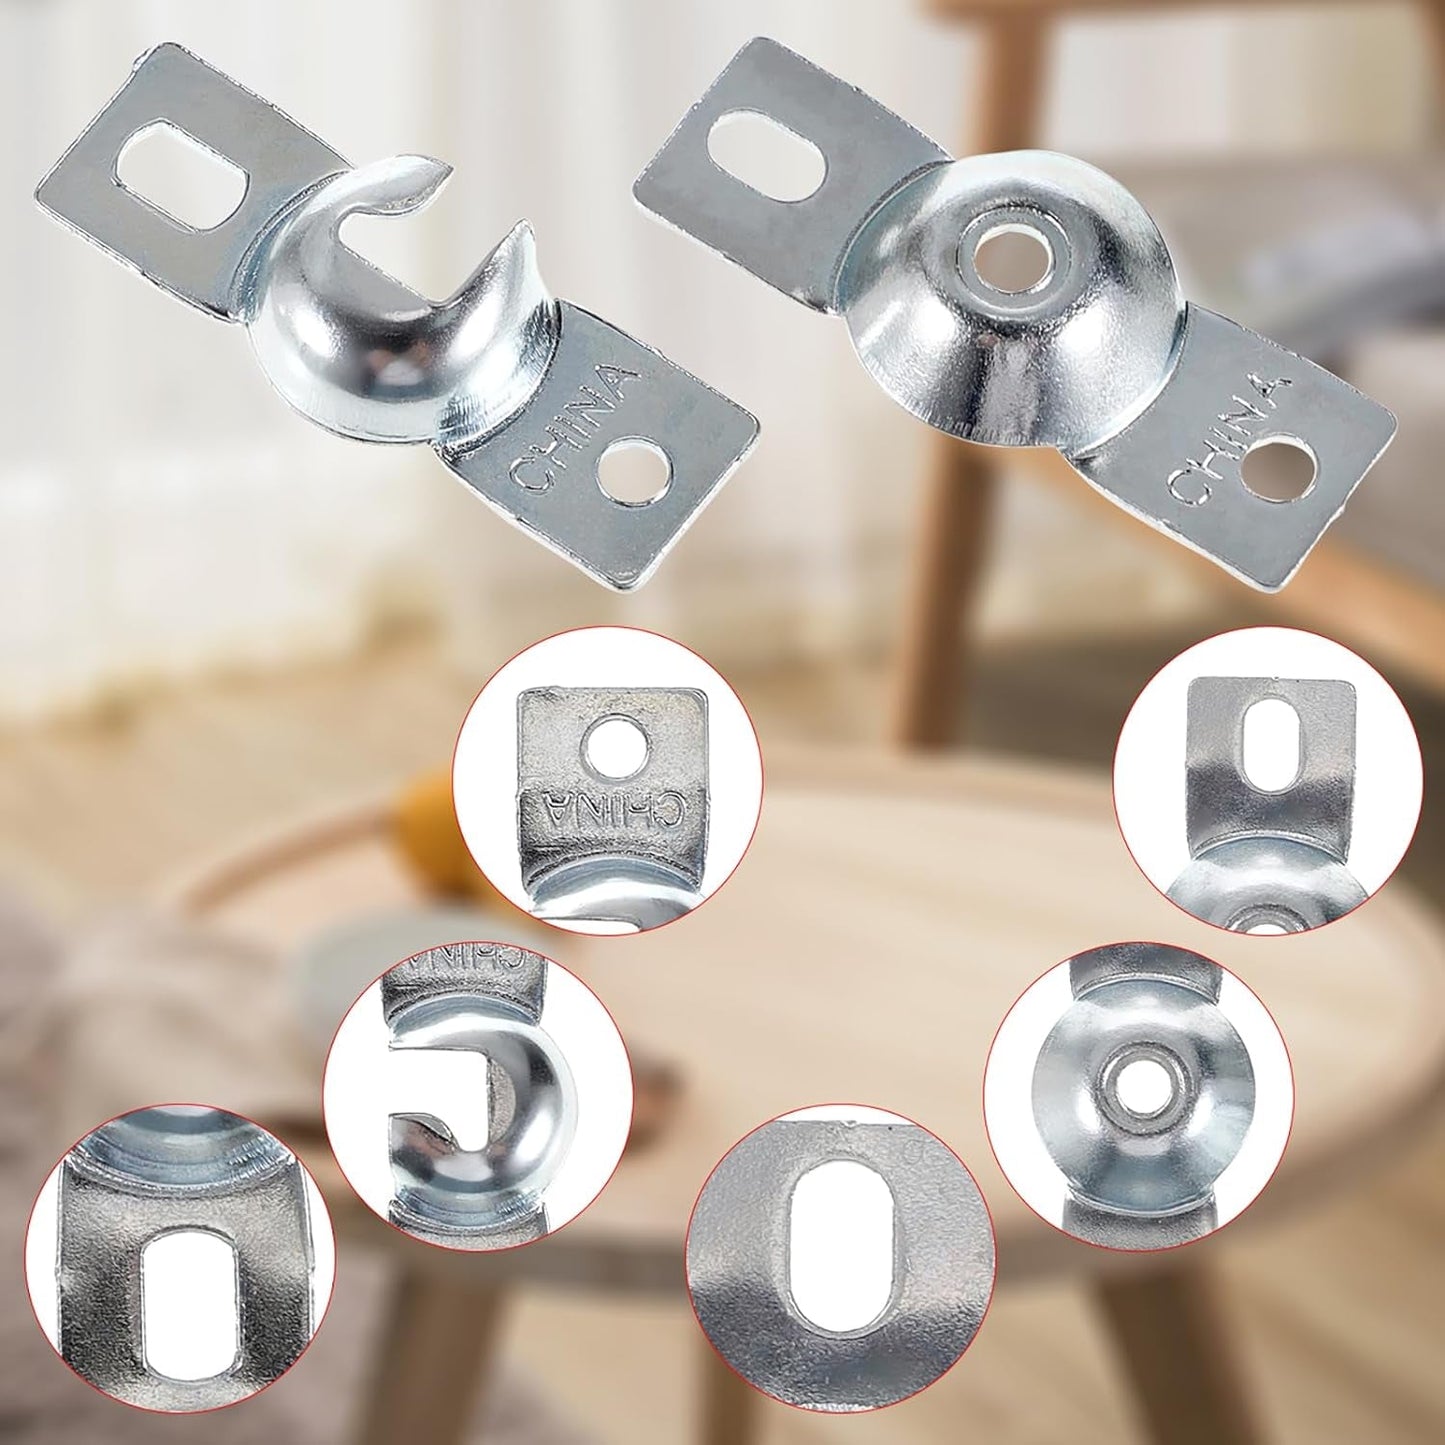 Sumnacon Metal Window Shade Brackets-4Pcs Roller Shade Hardware inside Mount with Screws,Sturdy Roller Shades Bracket for Living Room,Bedroom,Offices